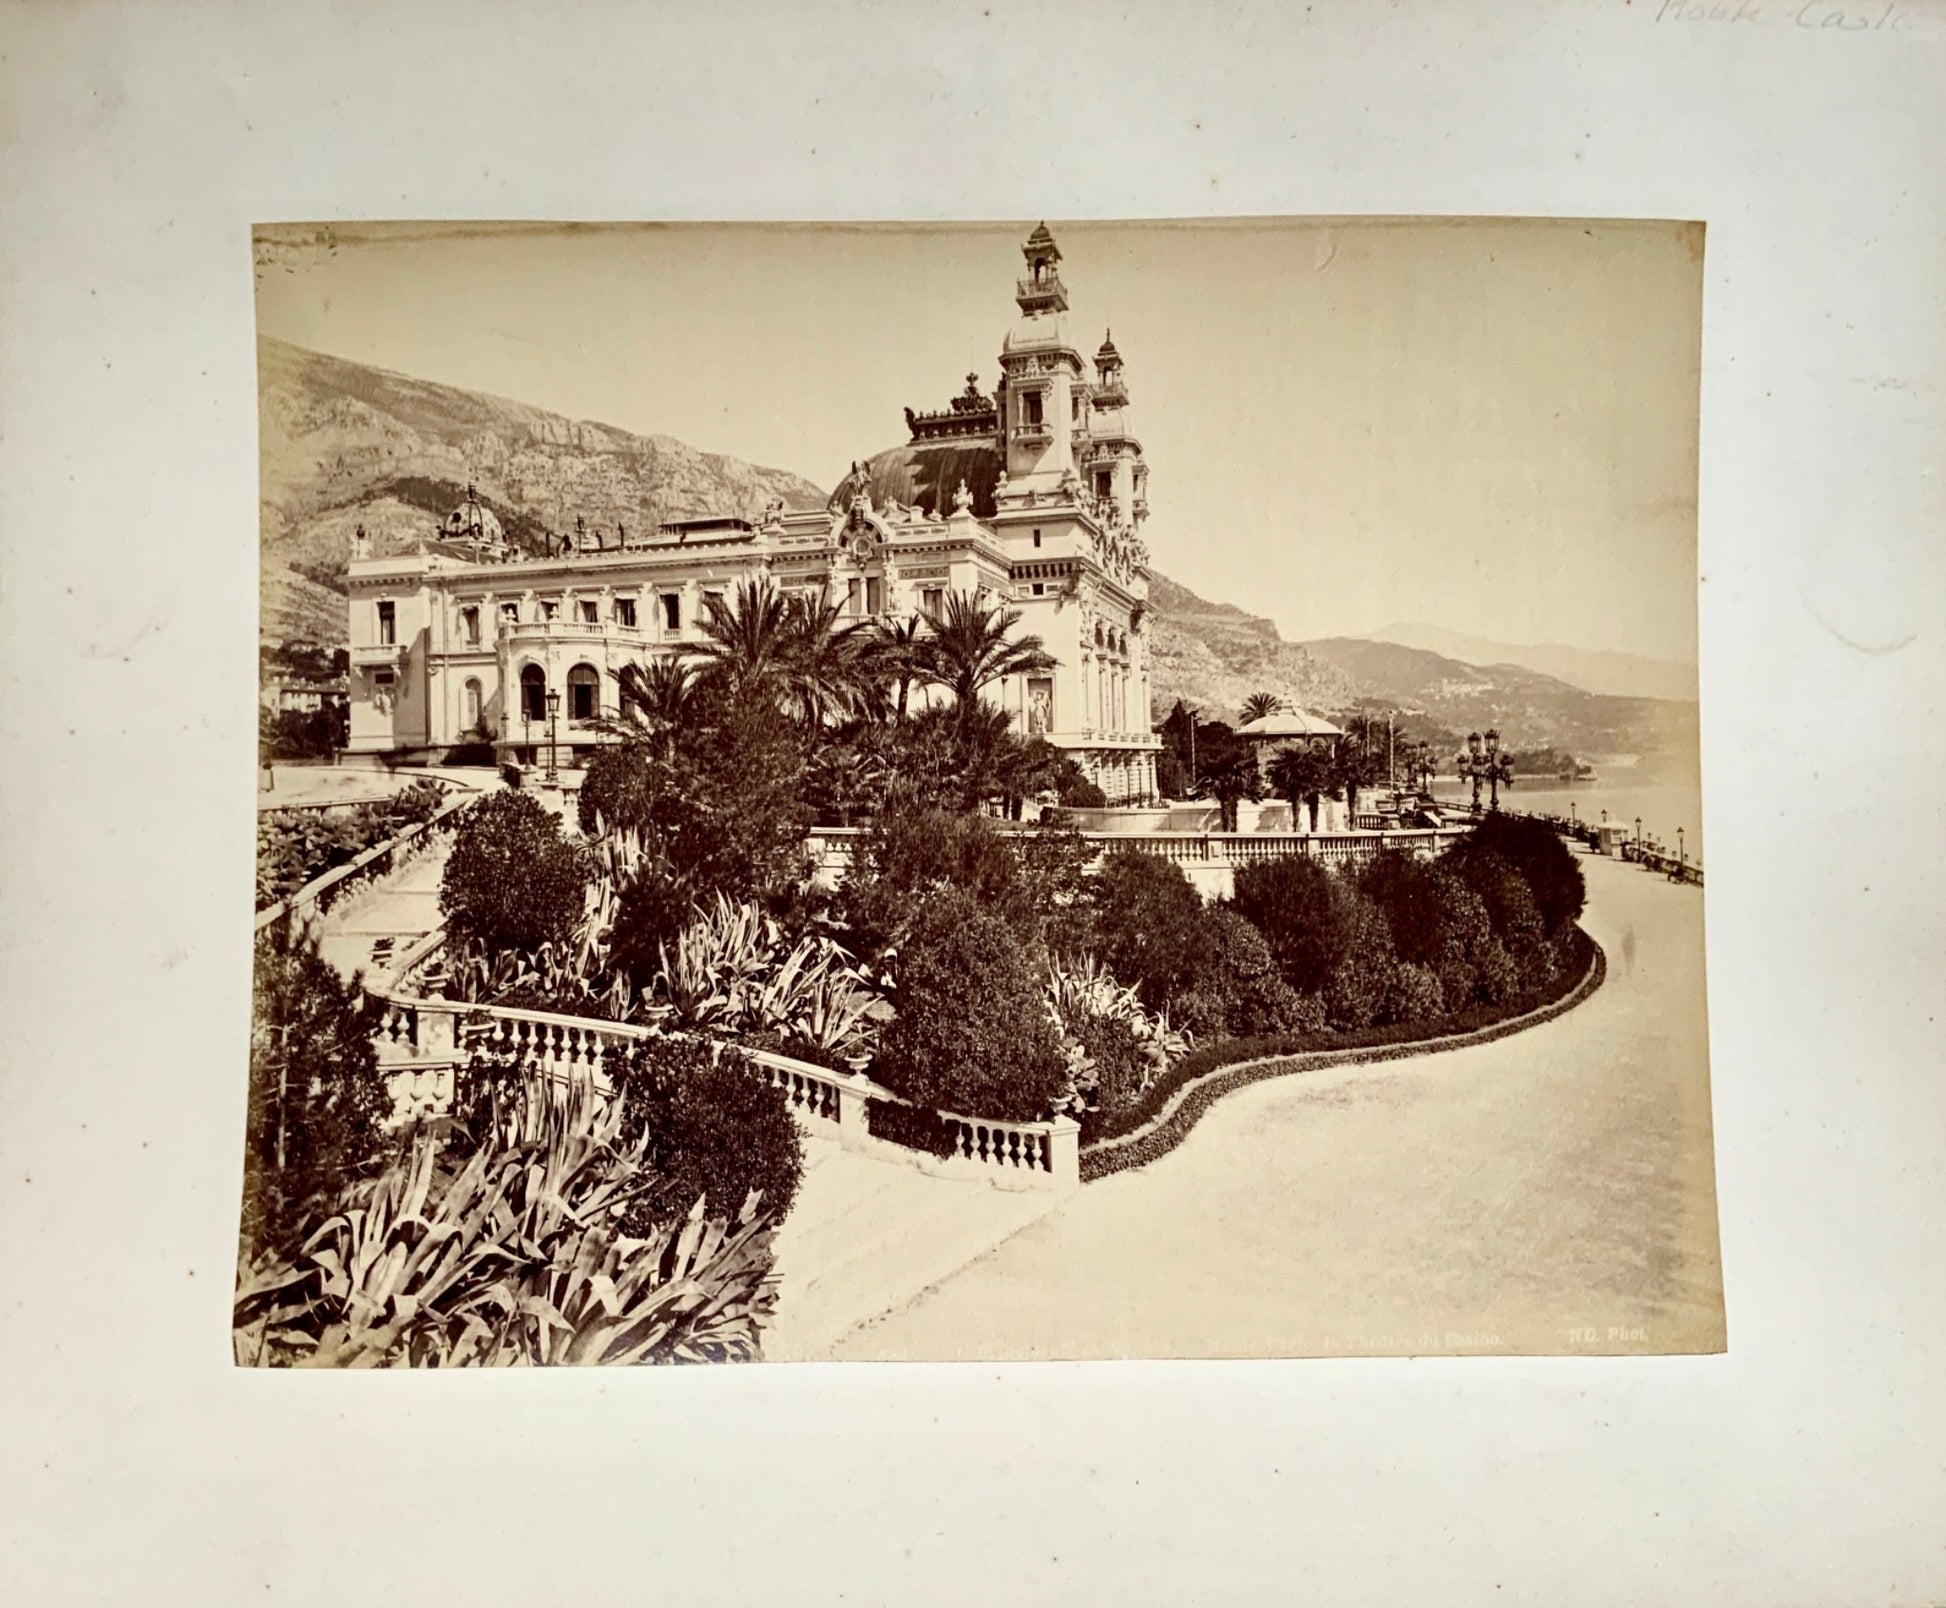 1880 c. Large albumen photograph of the Casino at Monte Carlo